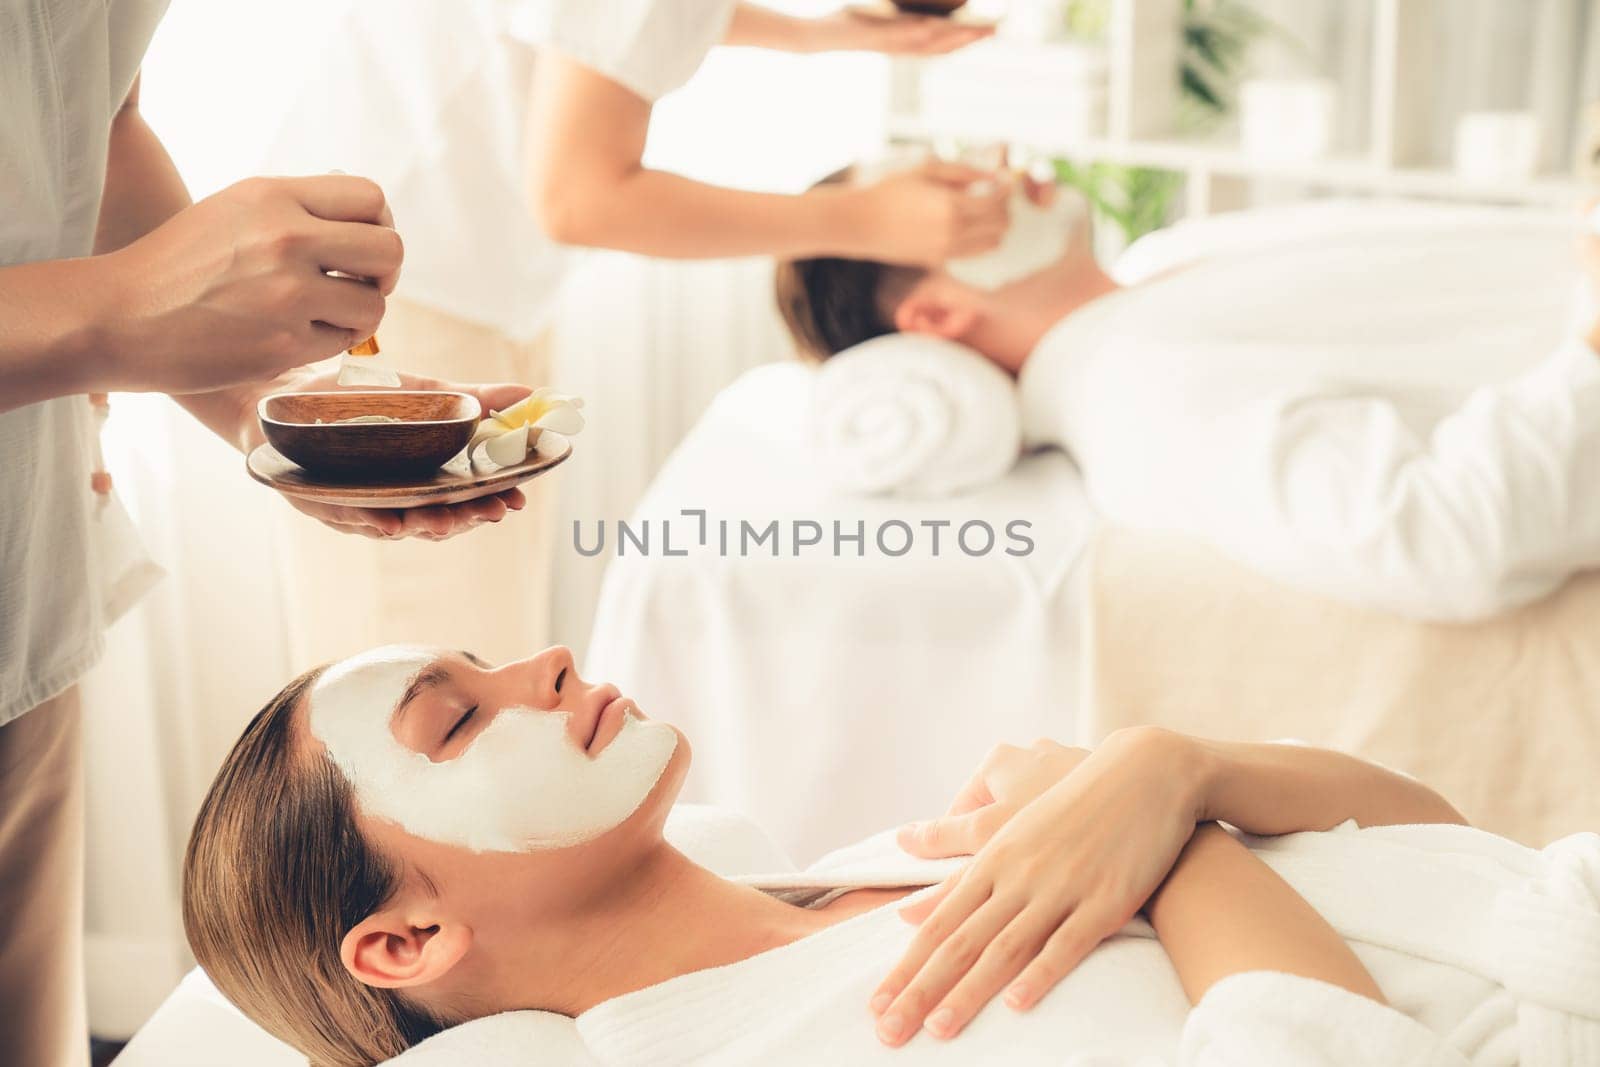 Serene ambiance of spa salon, couple indulges in rejuvenating with luxurious face cream massage with modern daylight. Facial skin treatment and beauty care concept. Quiescent